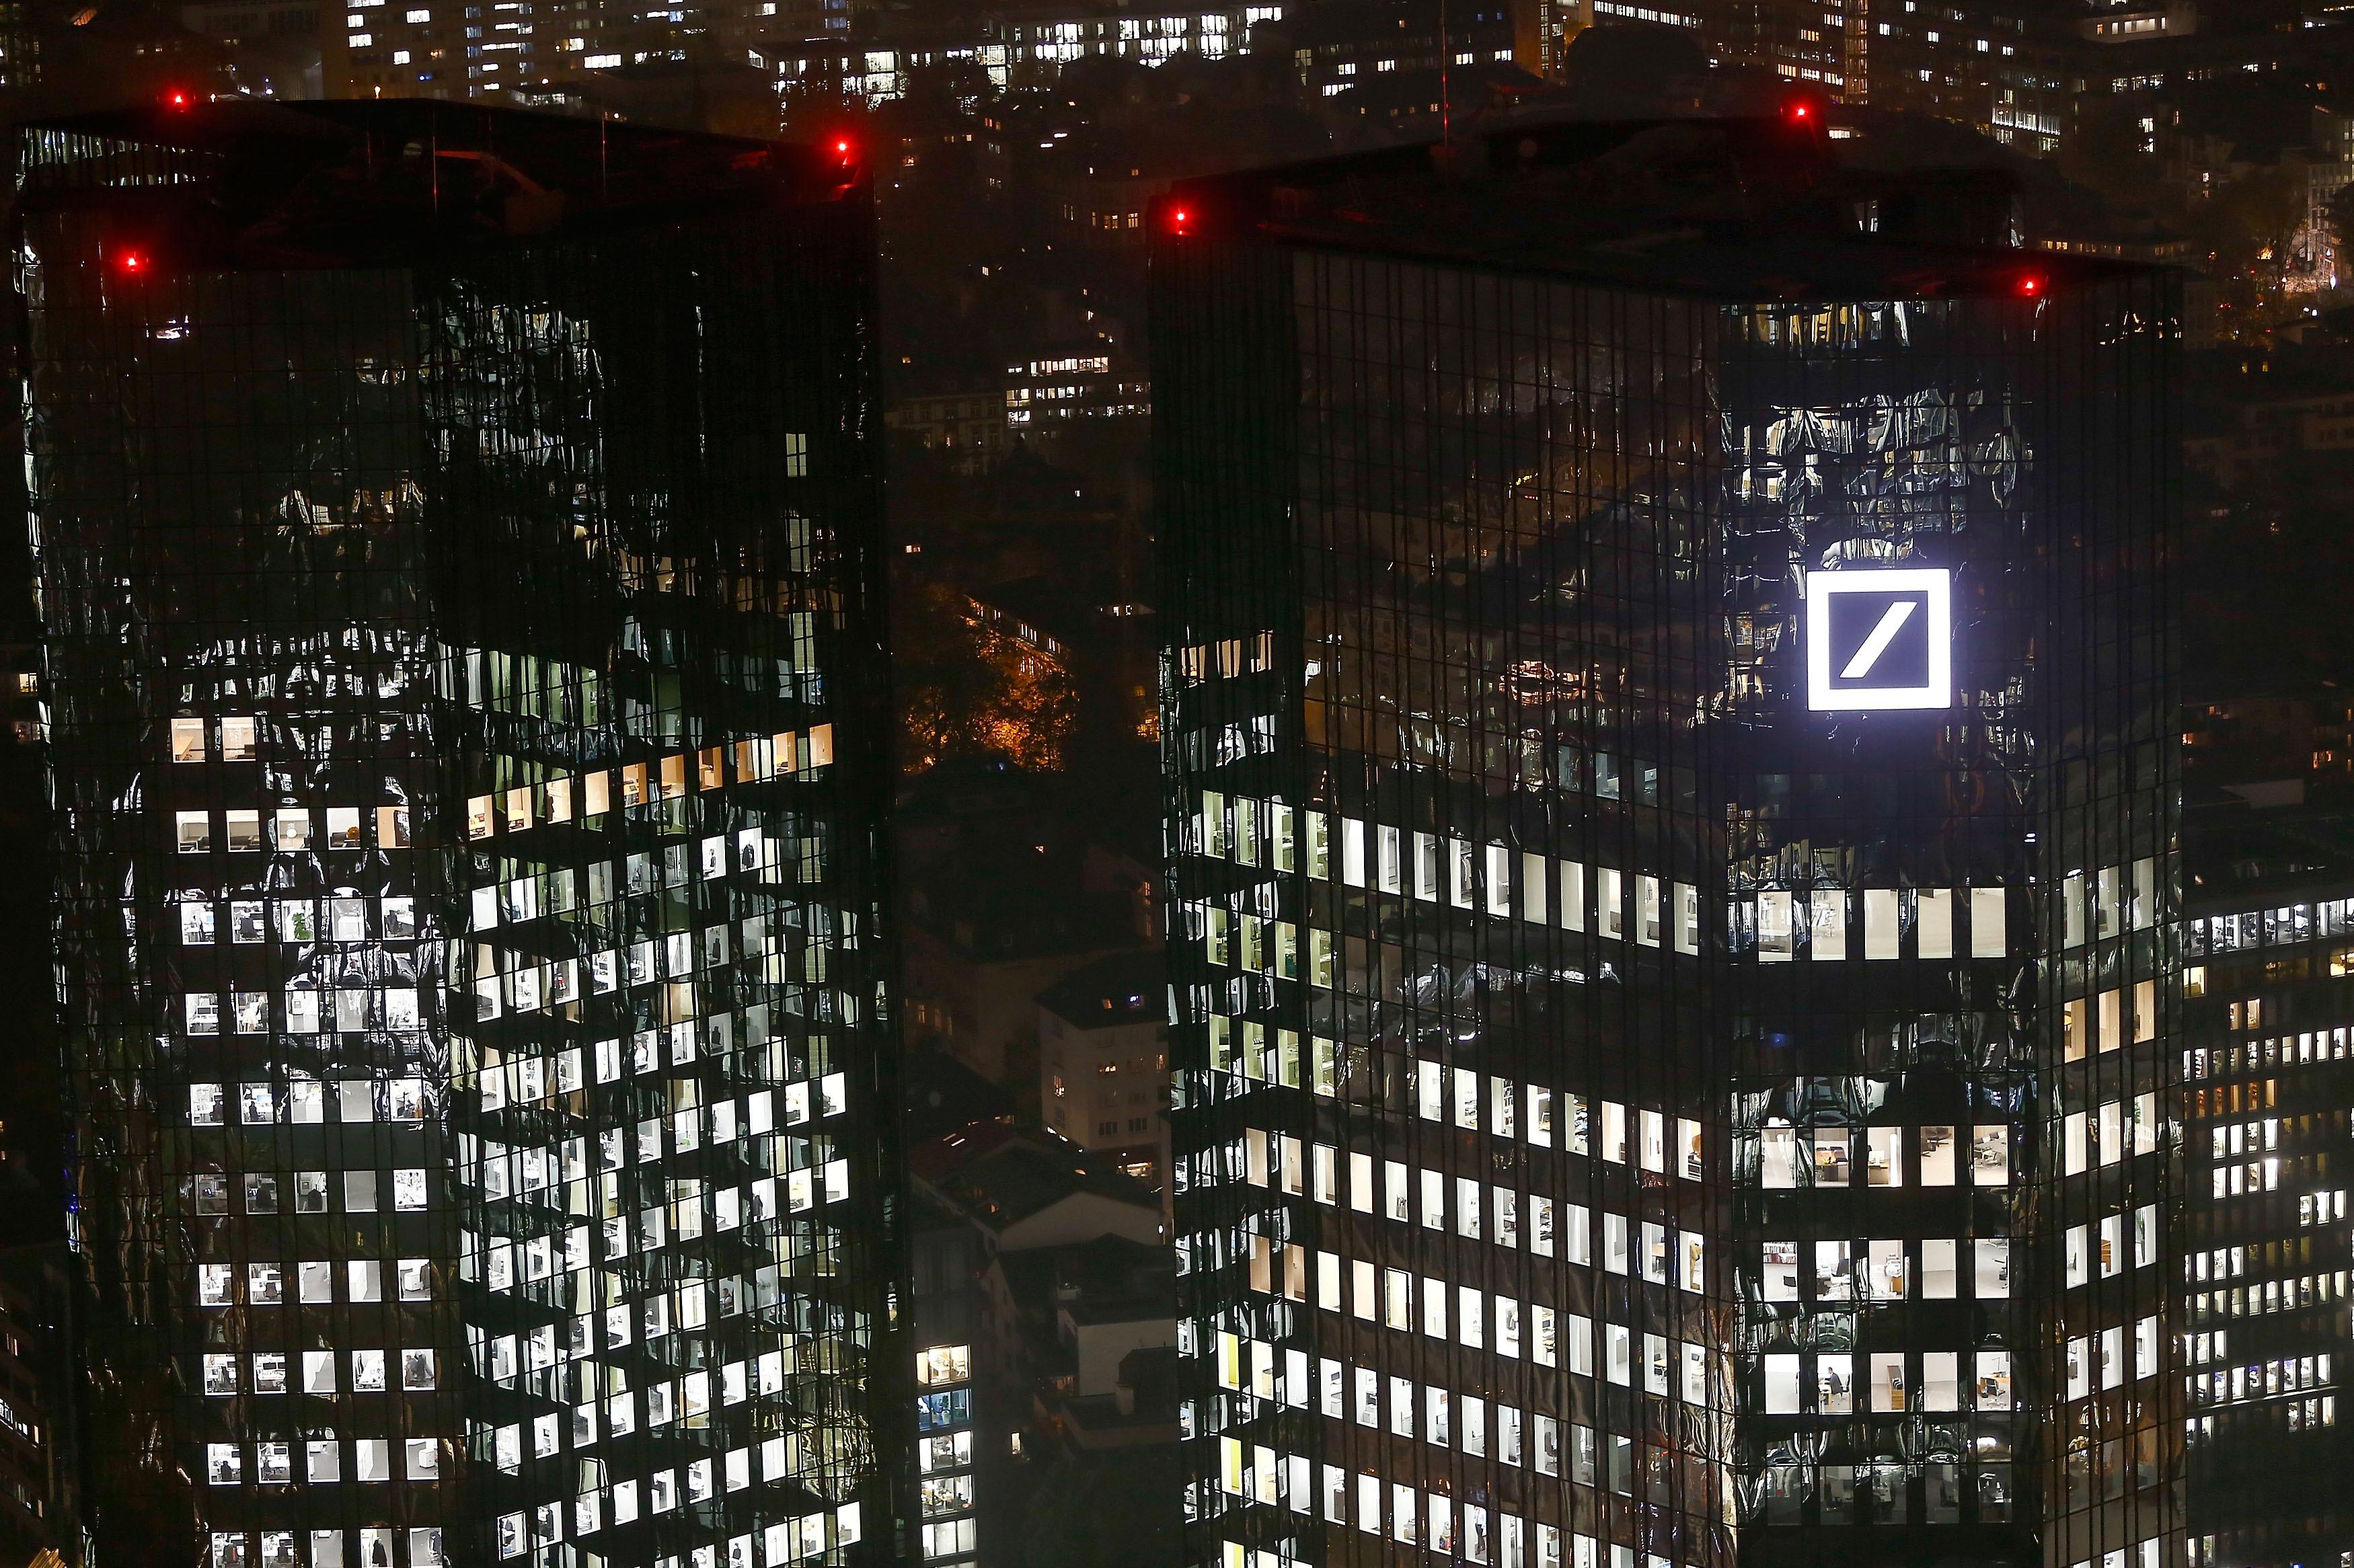 Deutsche Bank to shed one in three jobs, exit 10 countries